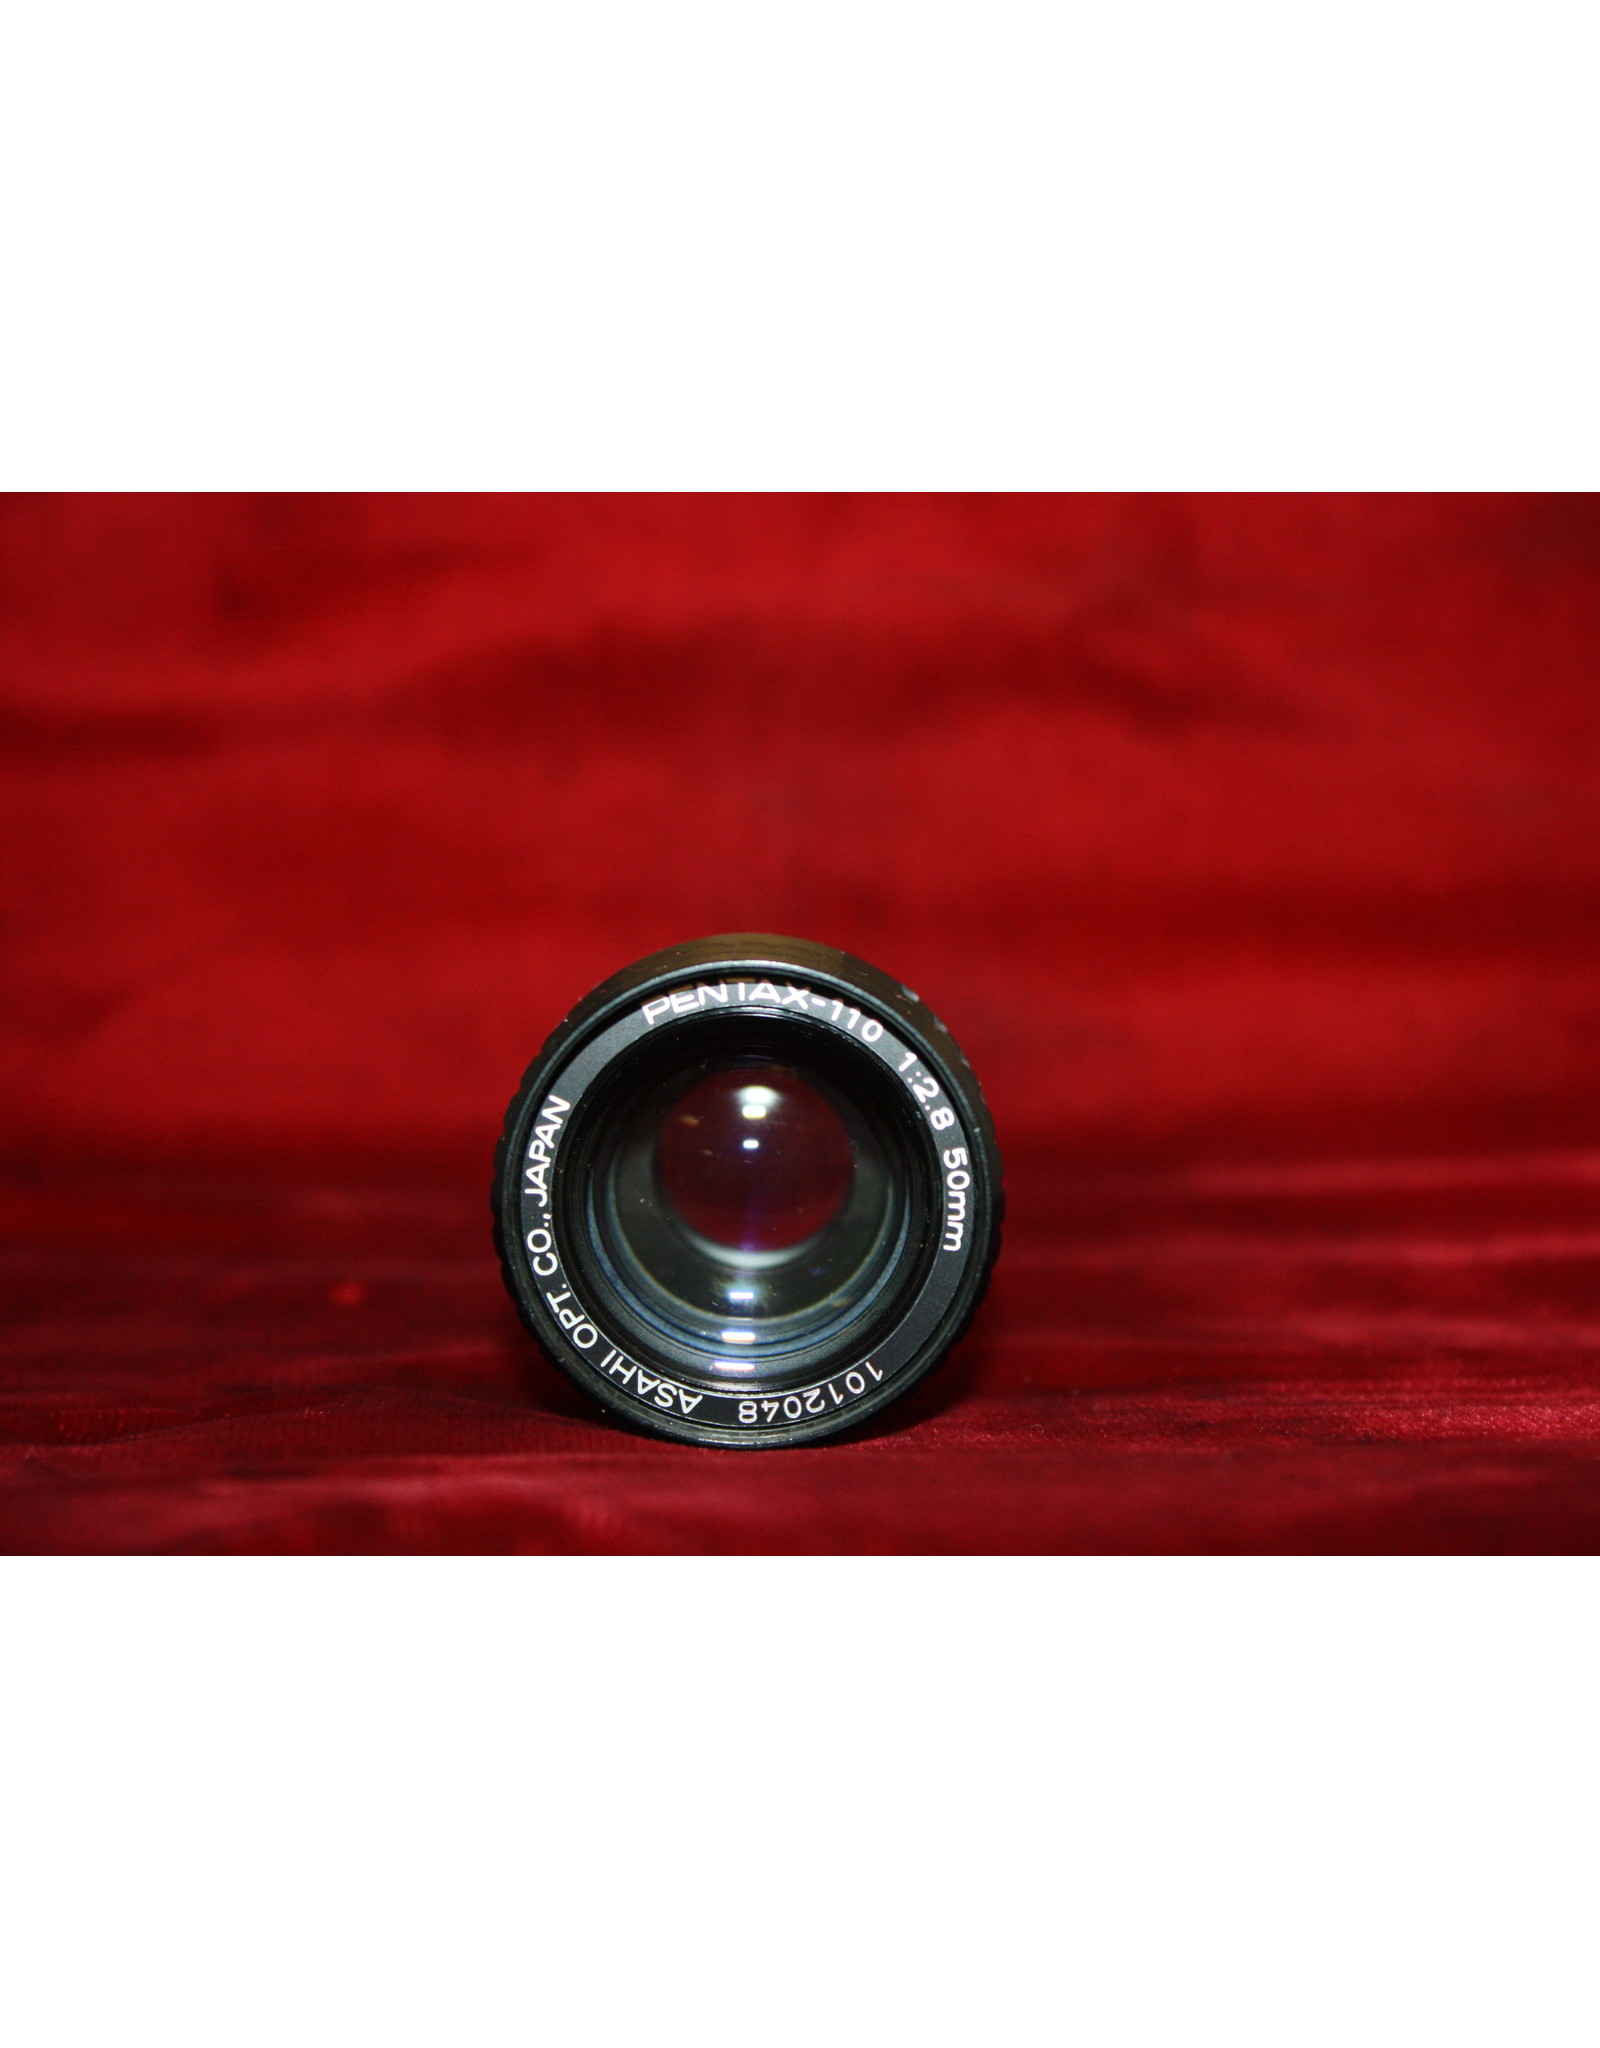 Pentax-110 50mm F2.8 Lens for Pentax Auto 110  (Pre-owned)